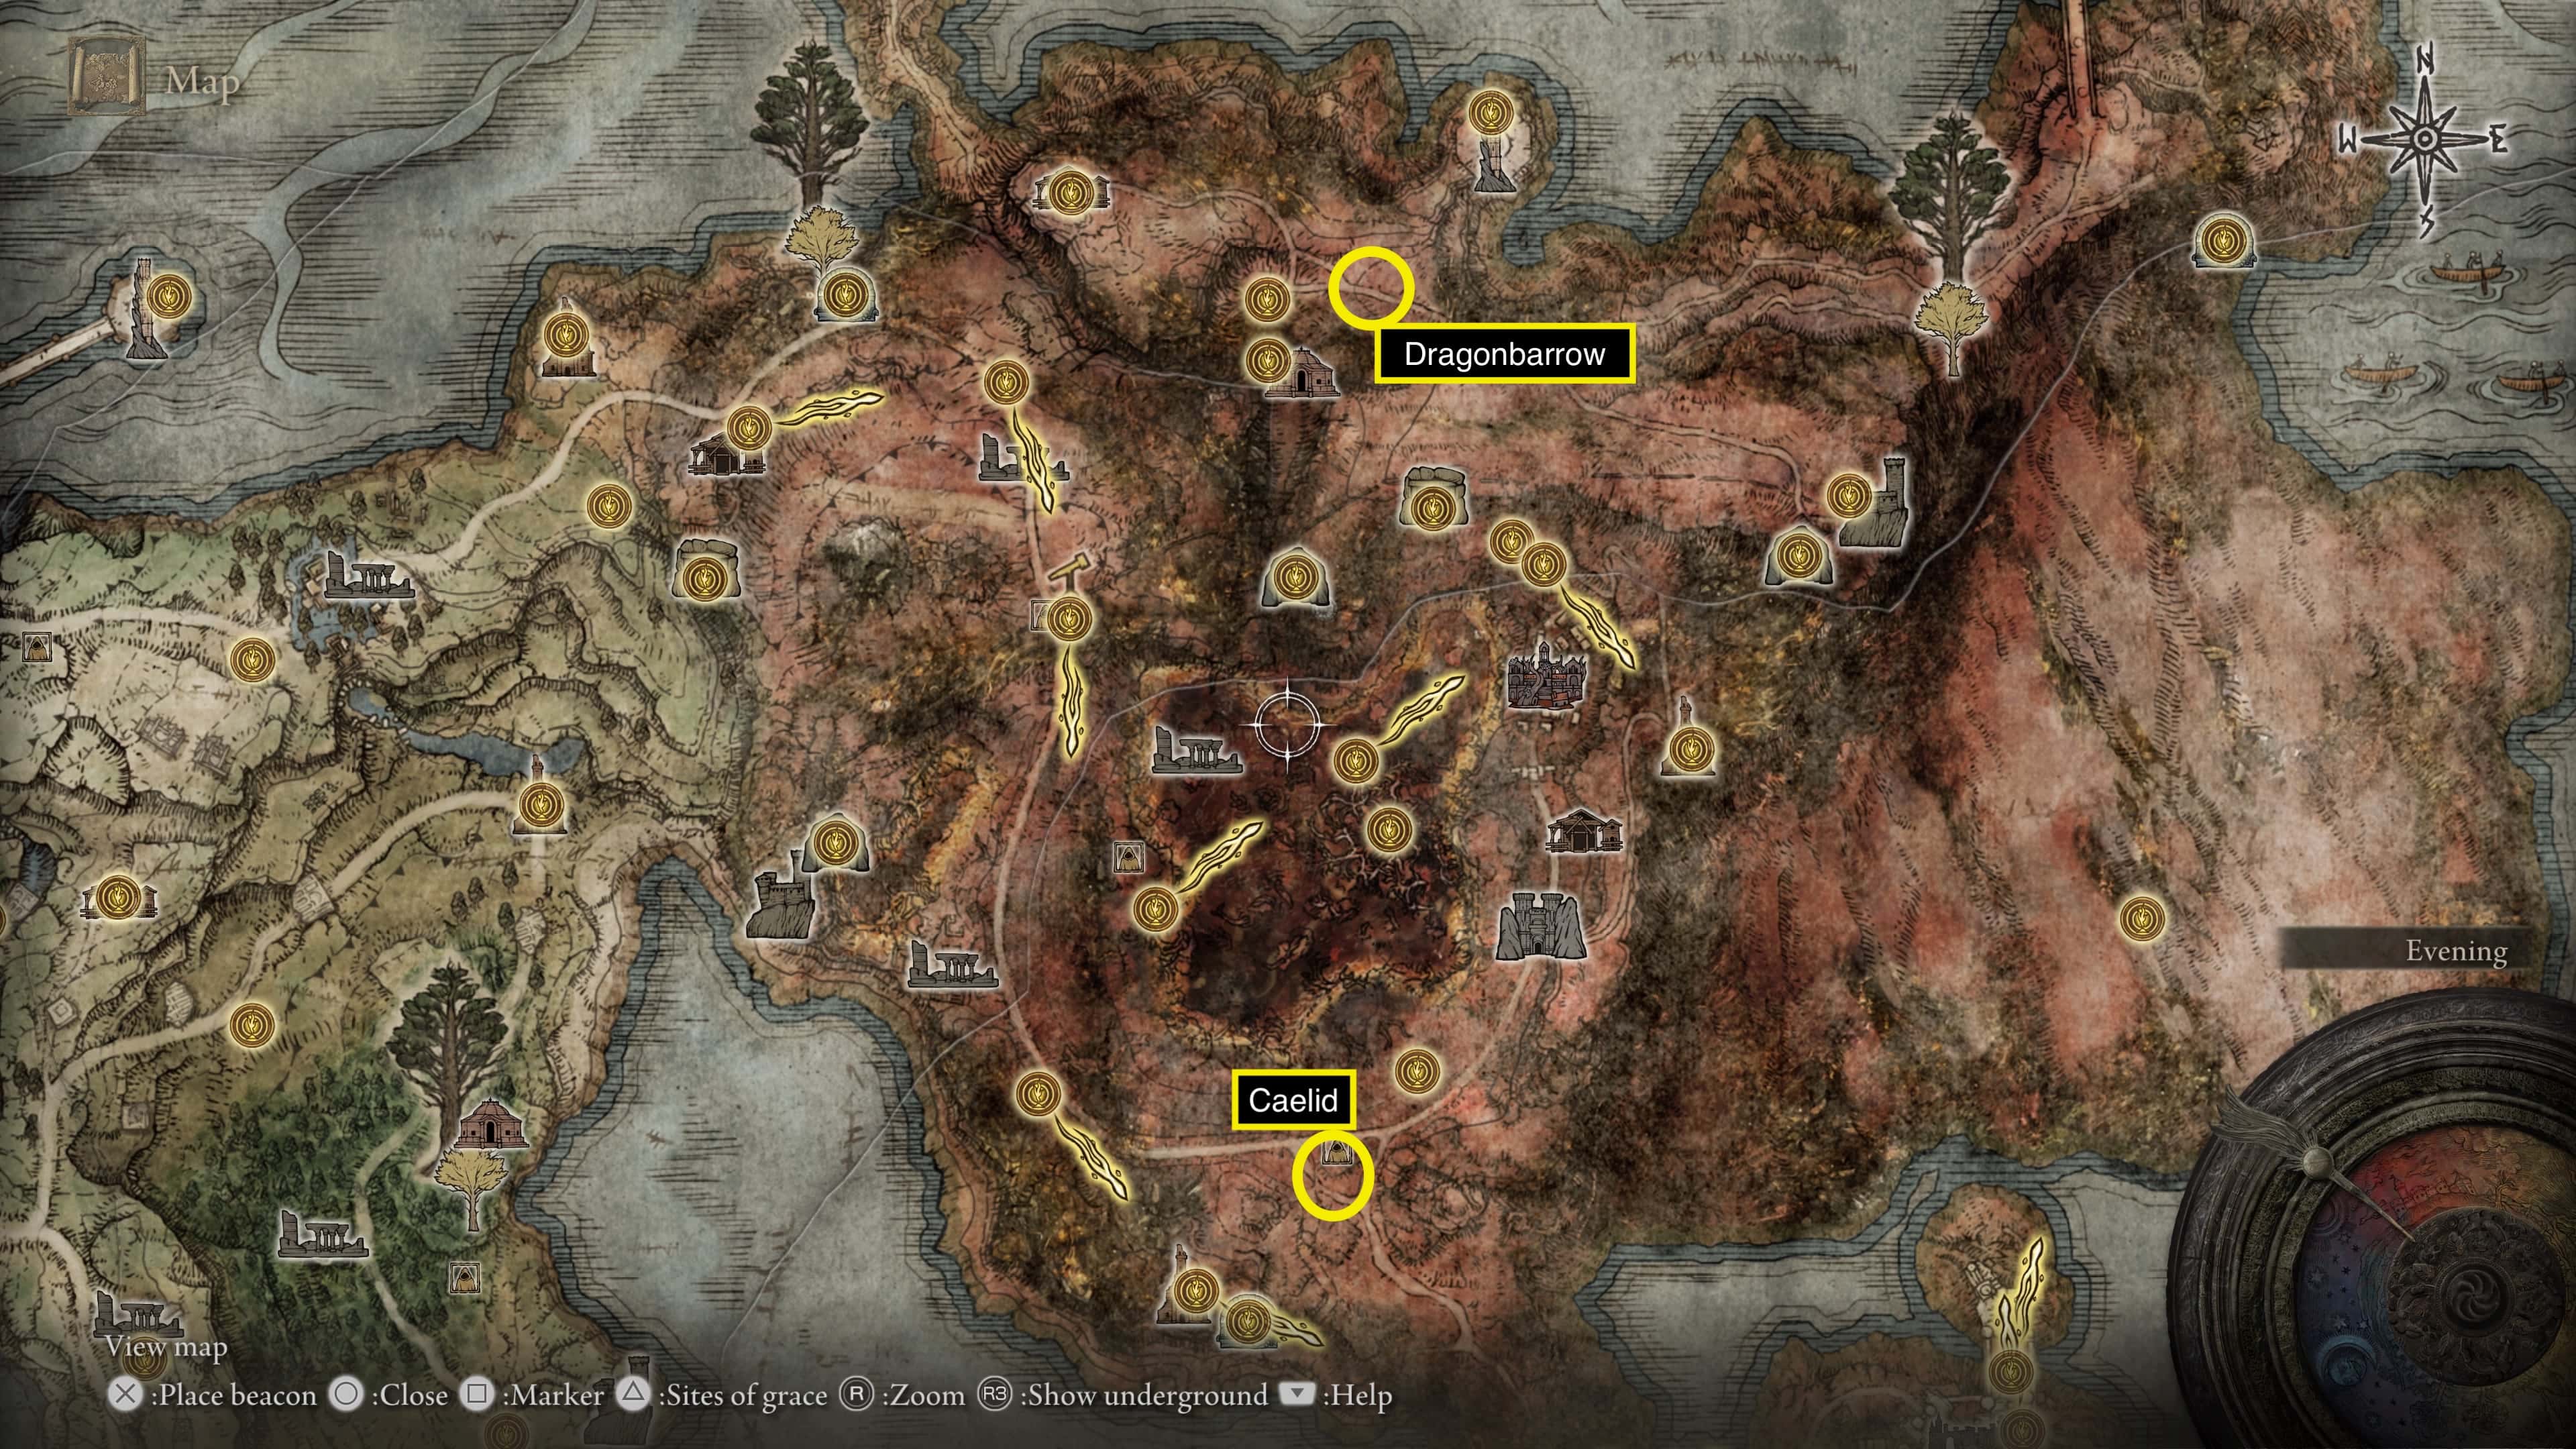 Elden Ring Map fragment: Location of the map fragments circled in yellow.